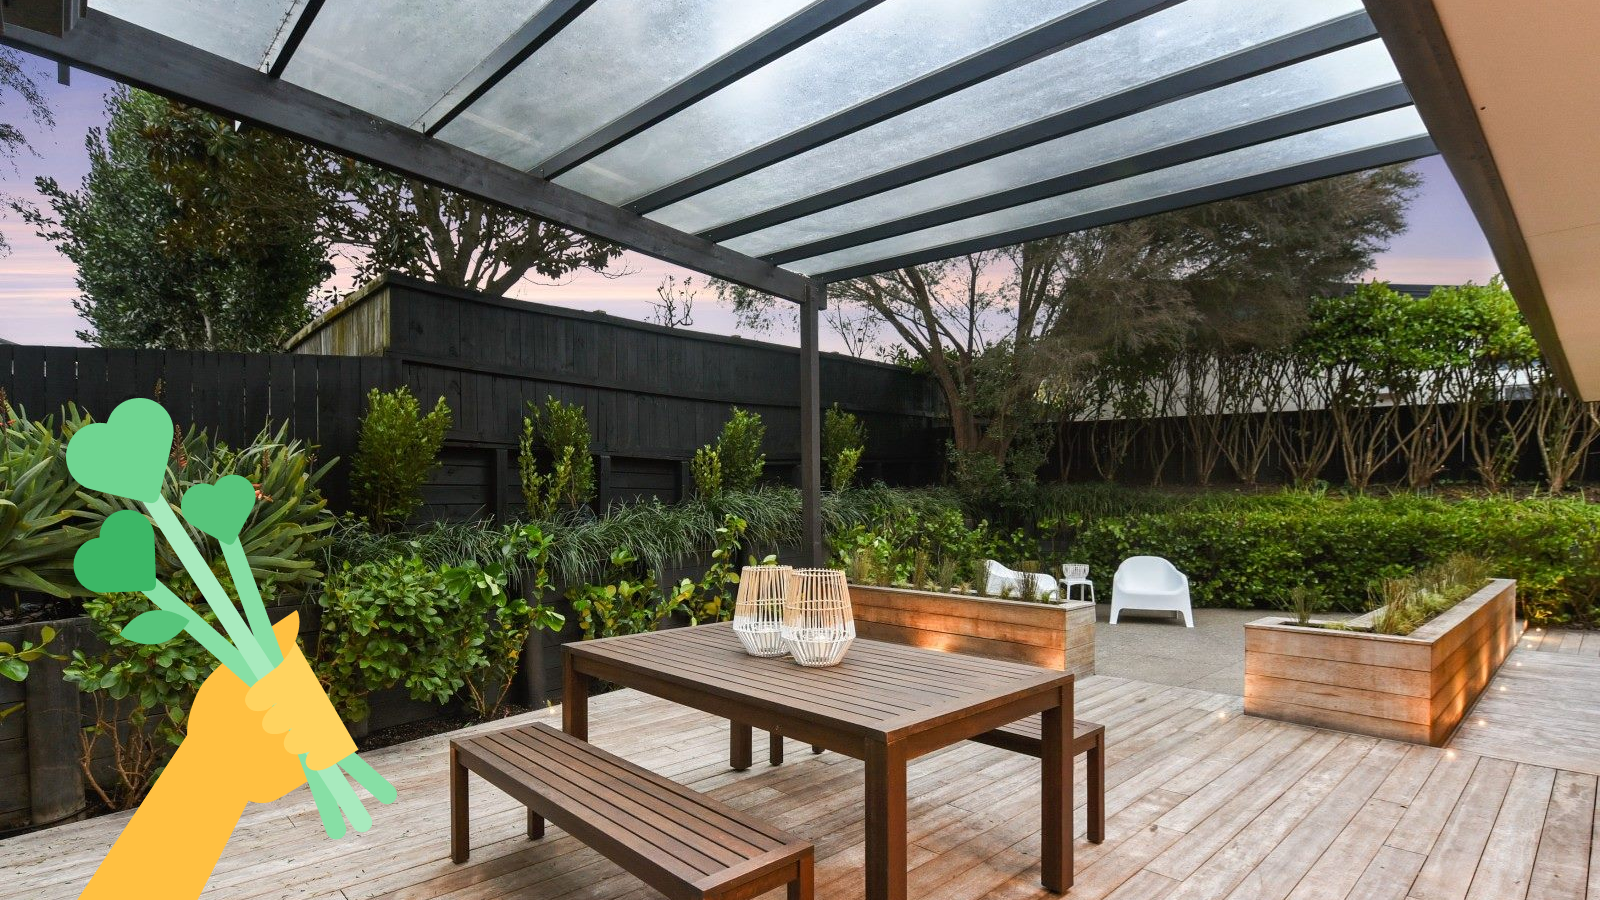 Outside area with a deck and pergola with a dining table and chairs